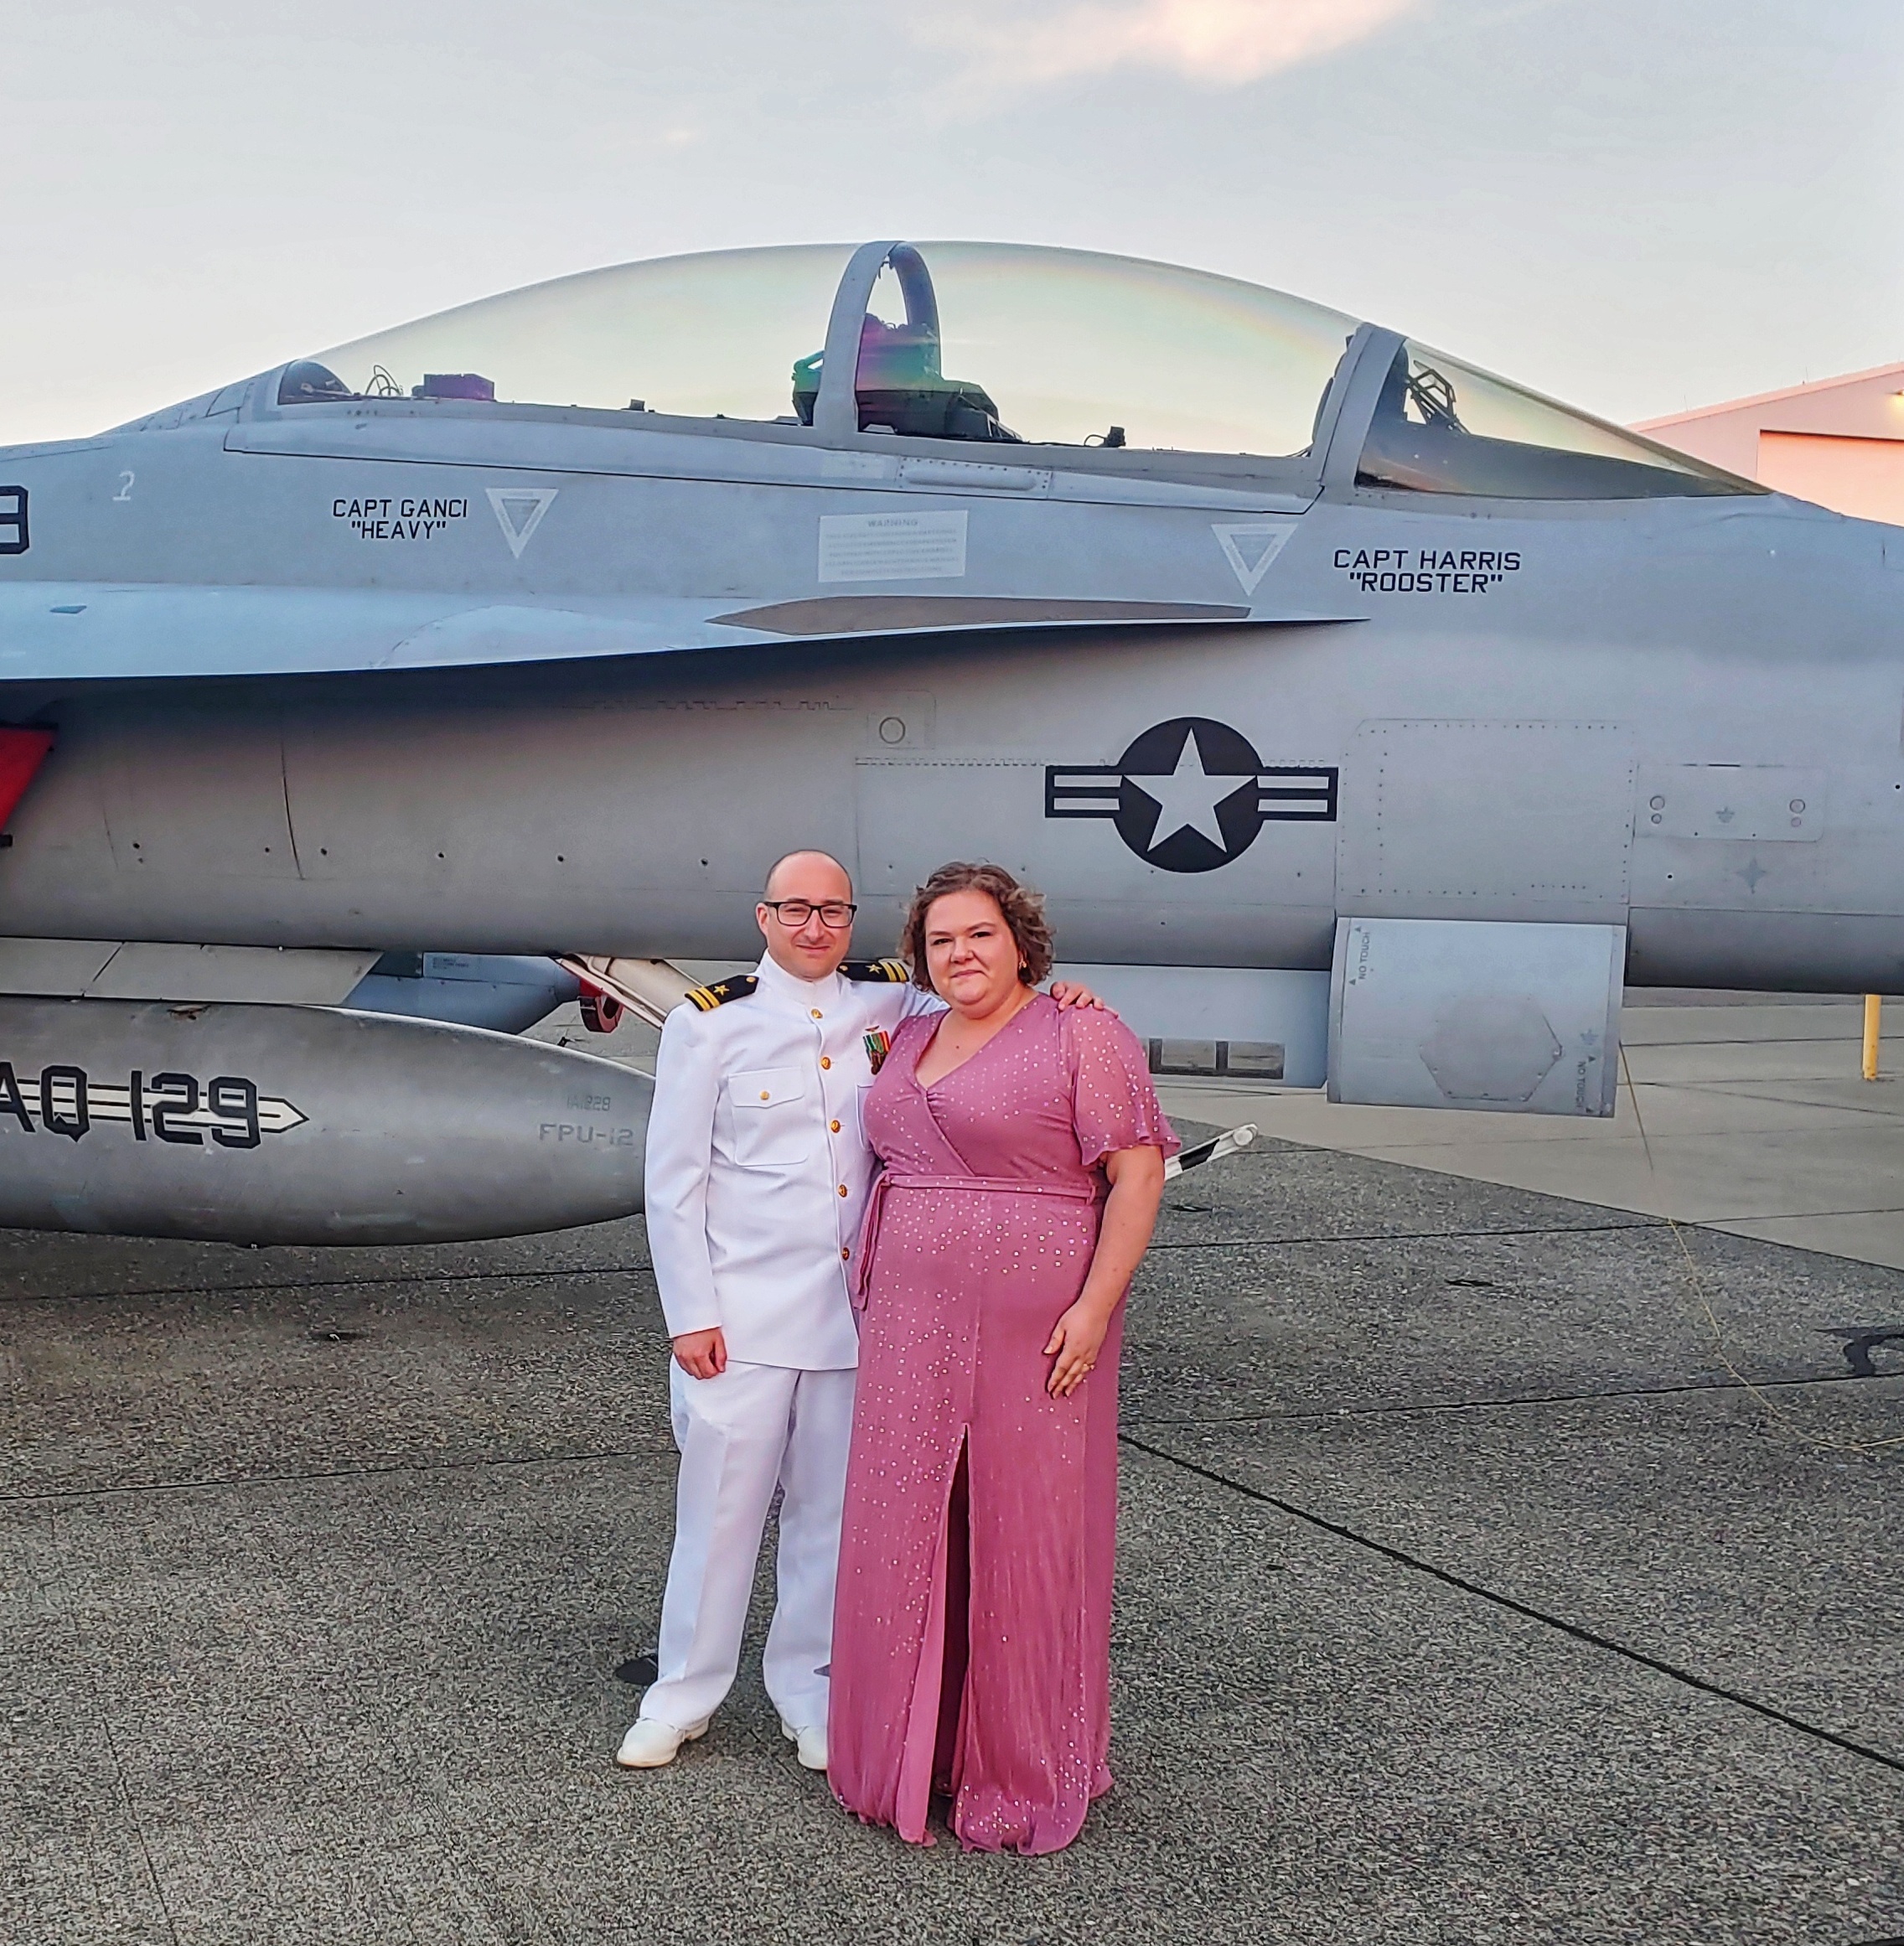 Jessica and husband in front of fighter jet